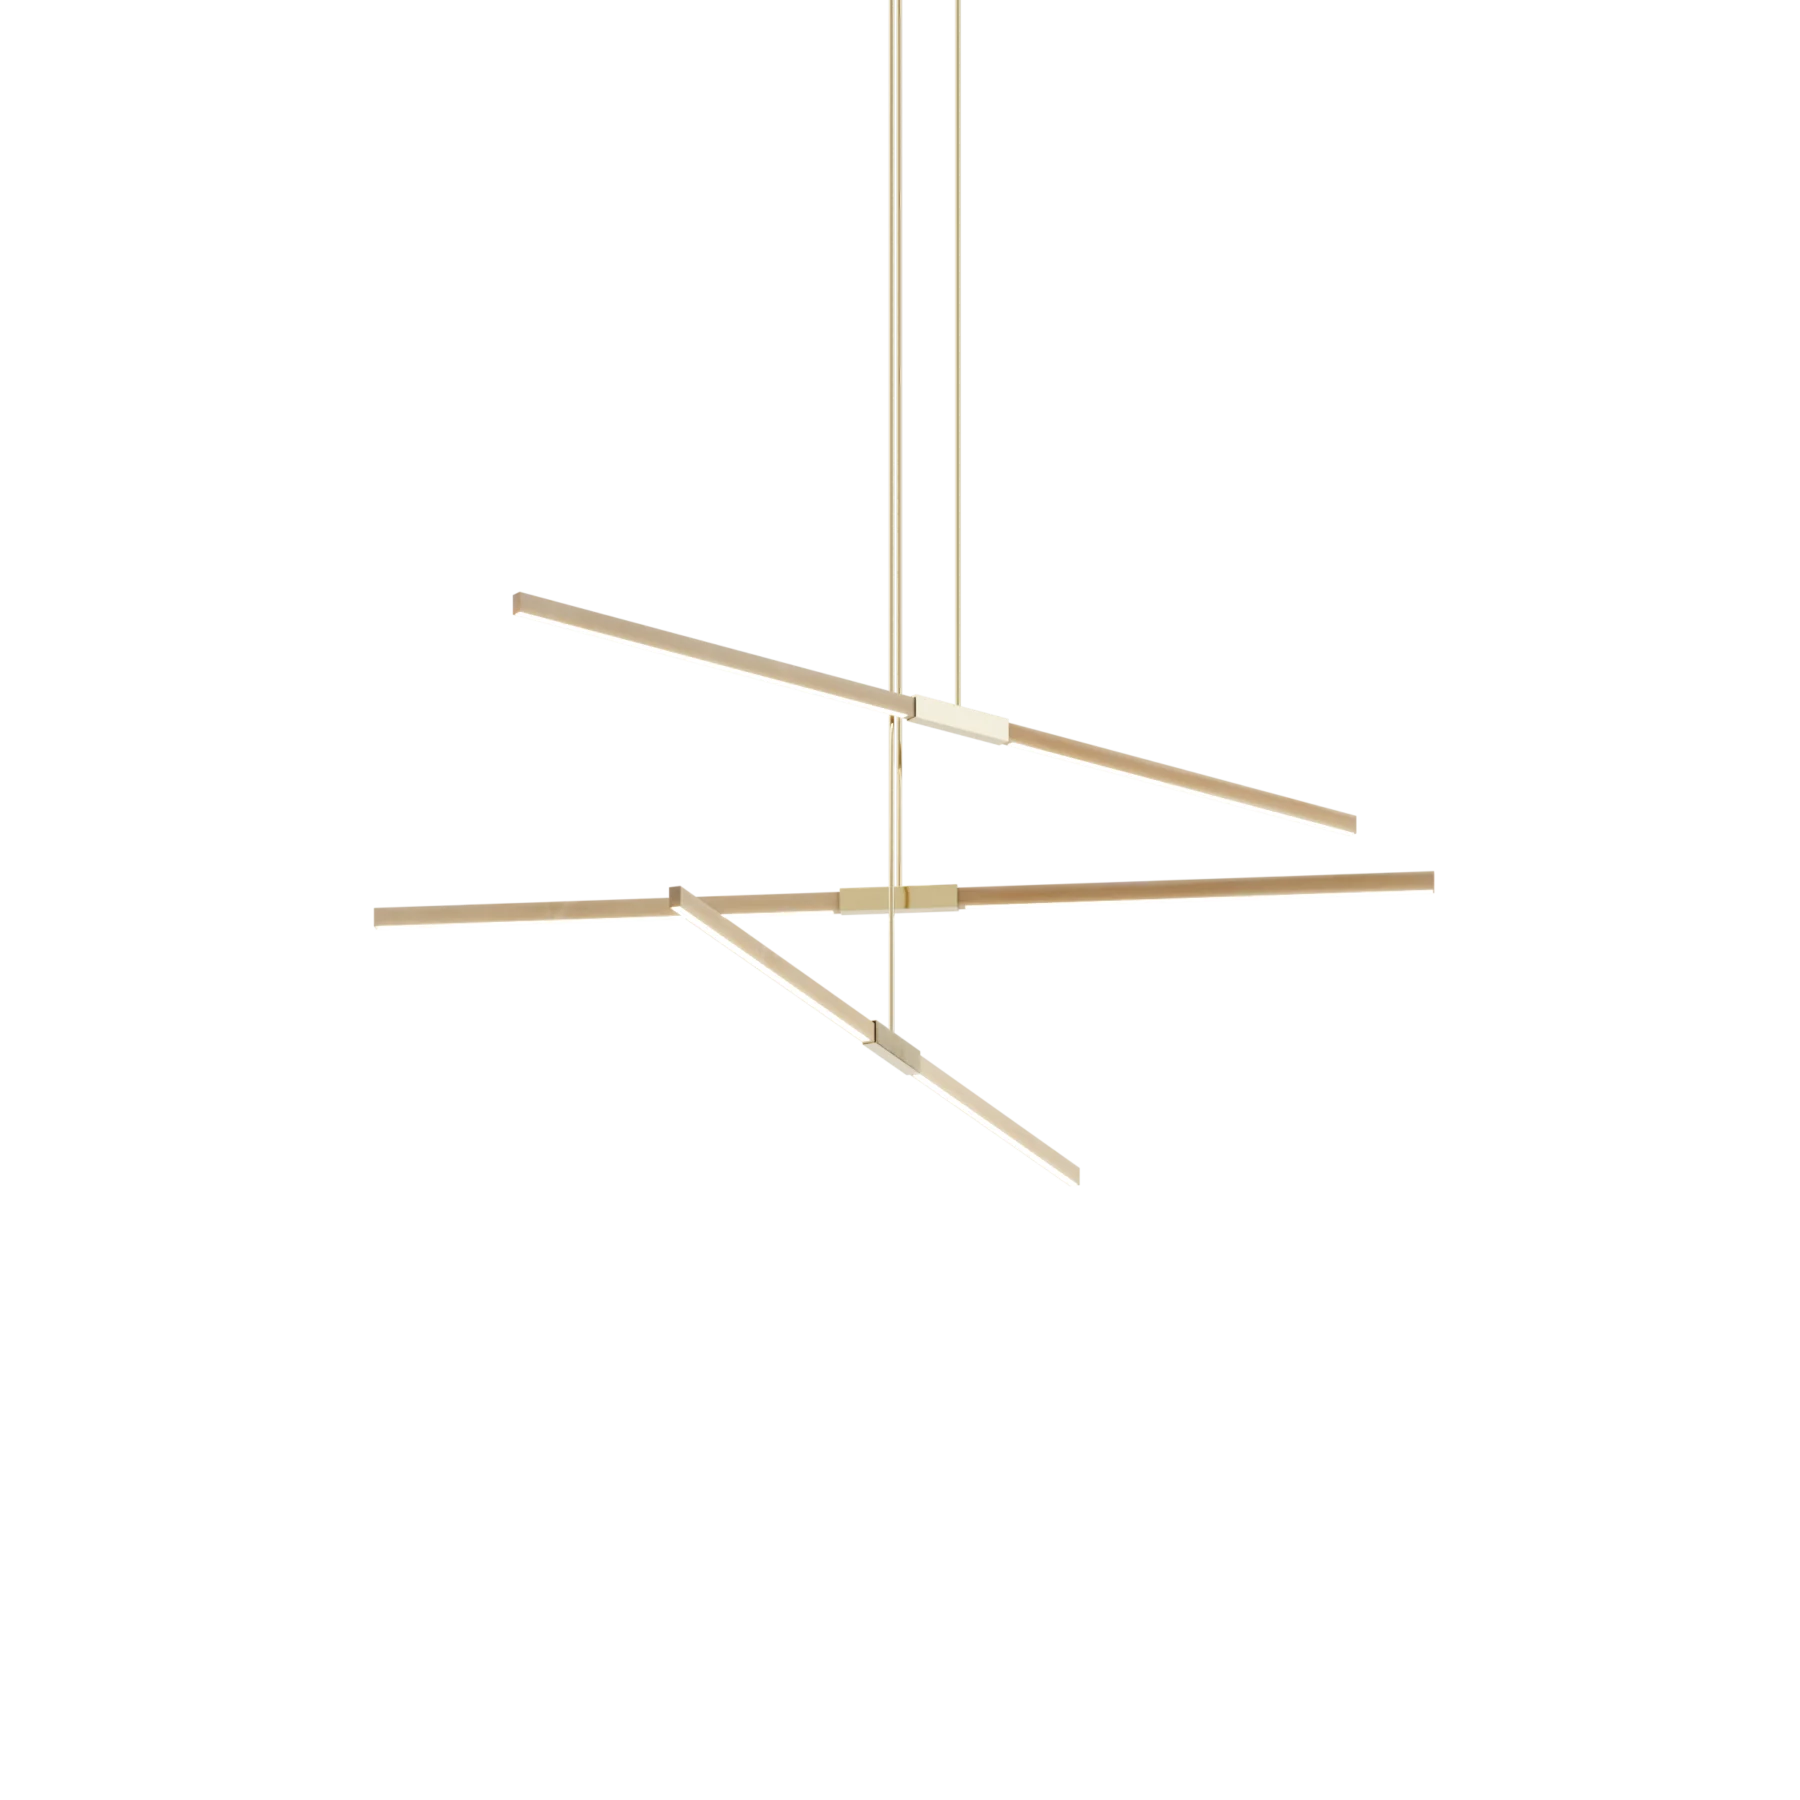 Image of a Stickbulb Multiple Linear Pendant lighting fixture. The modern fixture consists of sleek wooden beams with multiple integrated LED bulbs. The bulbs emit warm, diffused light, casting a gentle glow in the surrounding space. The wooden beam is suspended from thin cables, giving it a floating appearance.